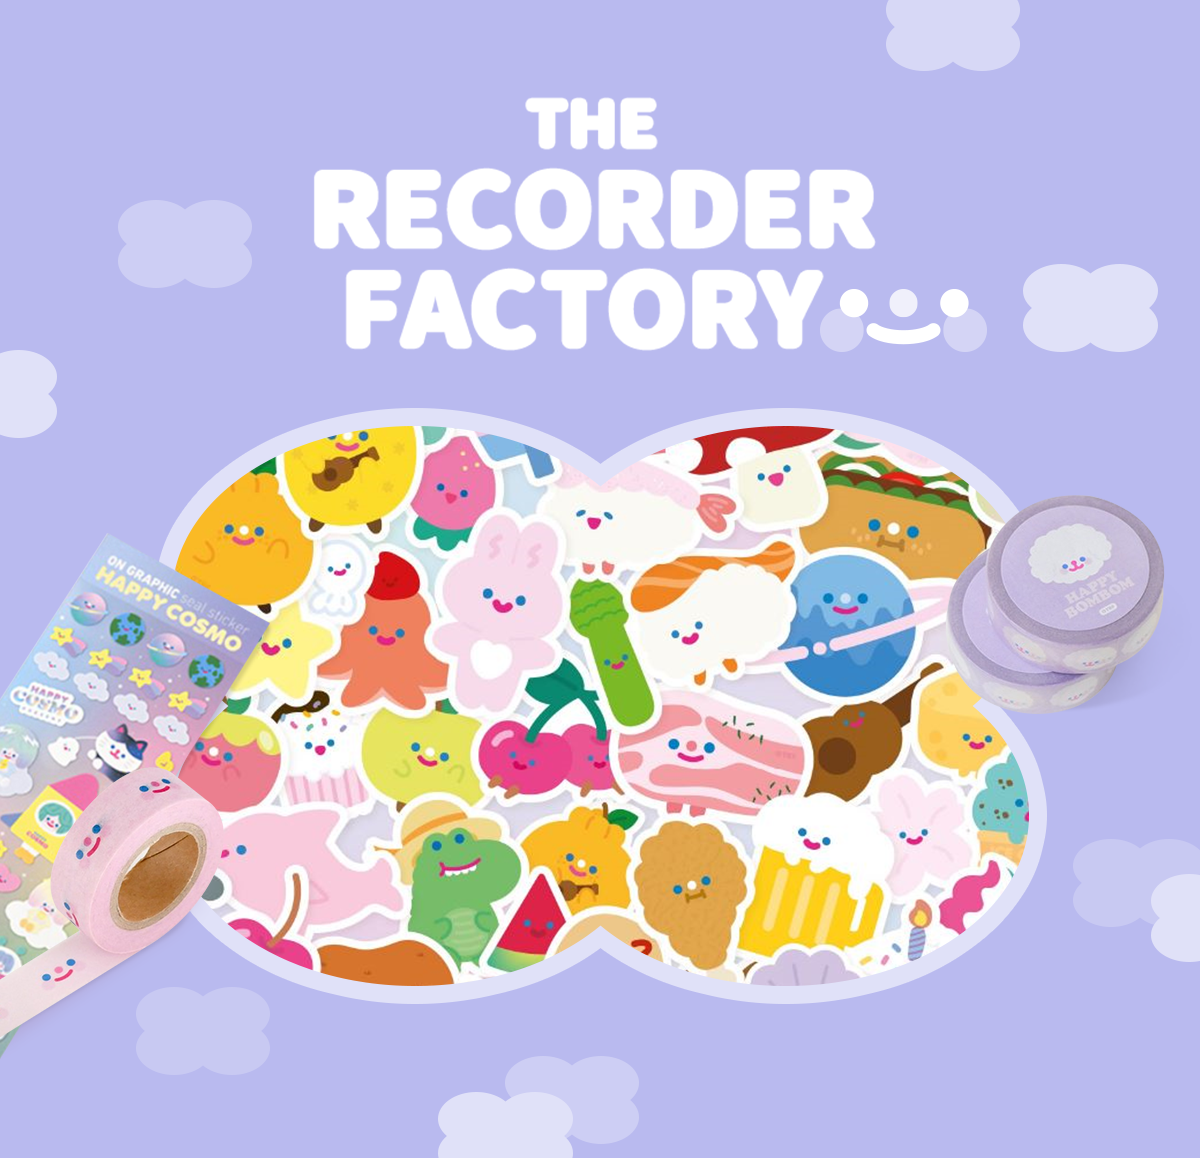 The Recorder Factory